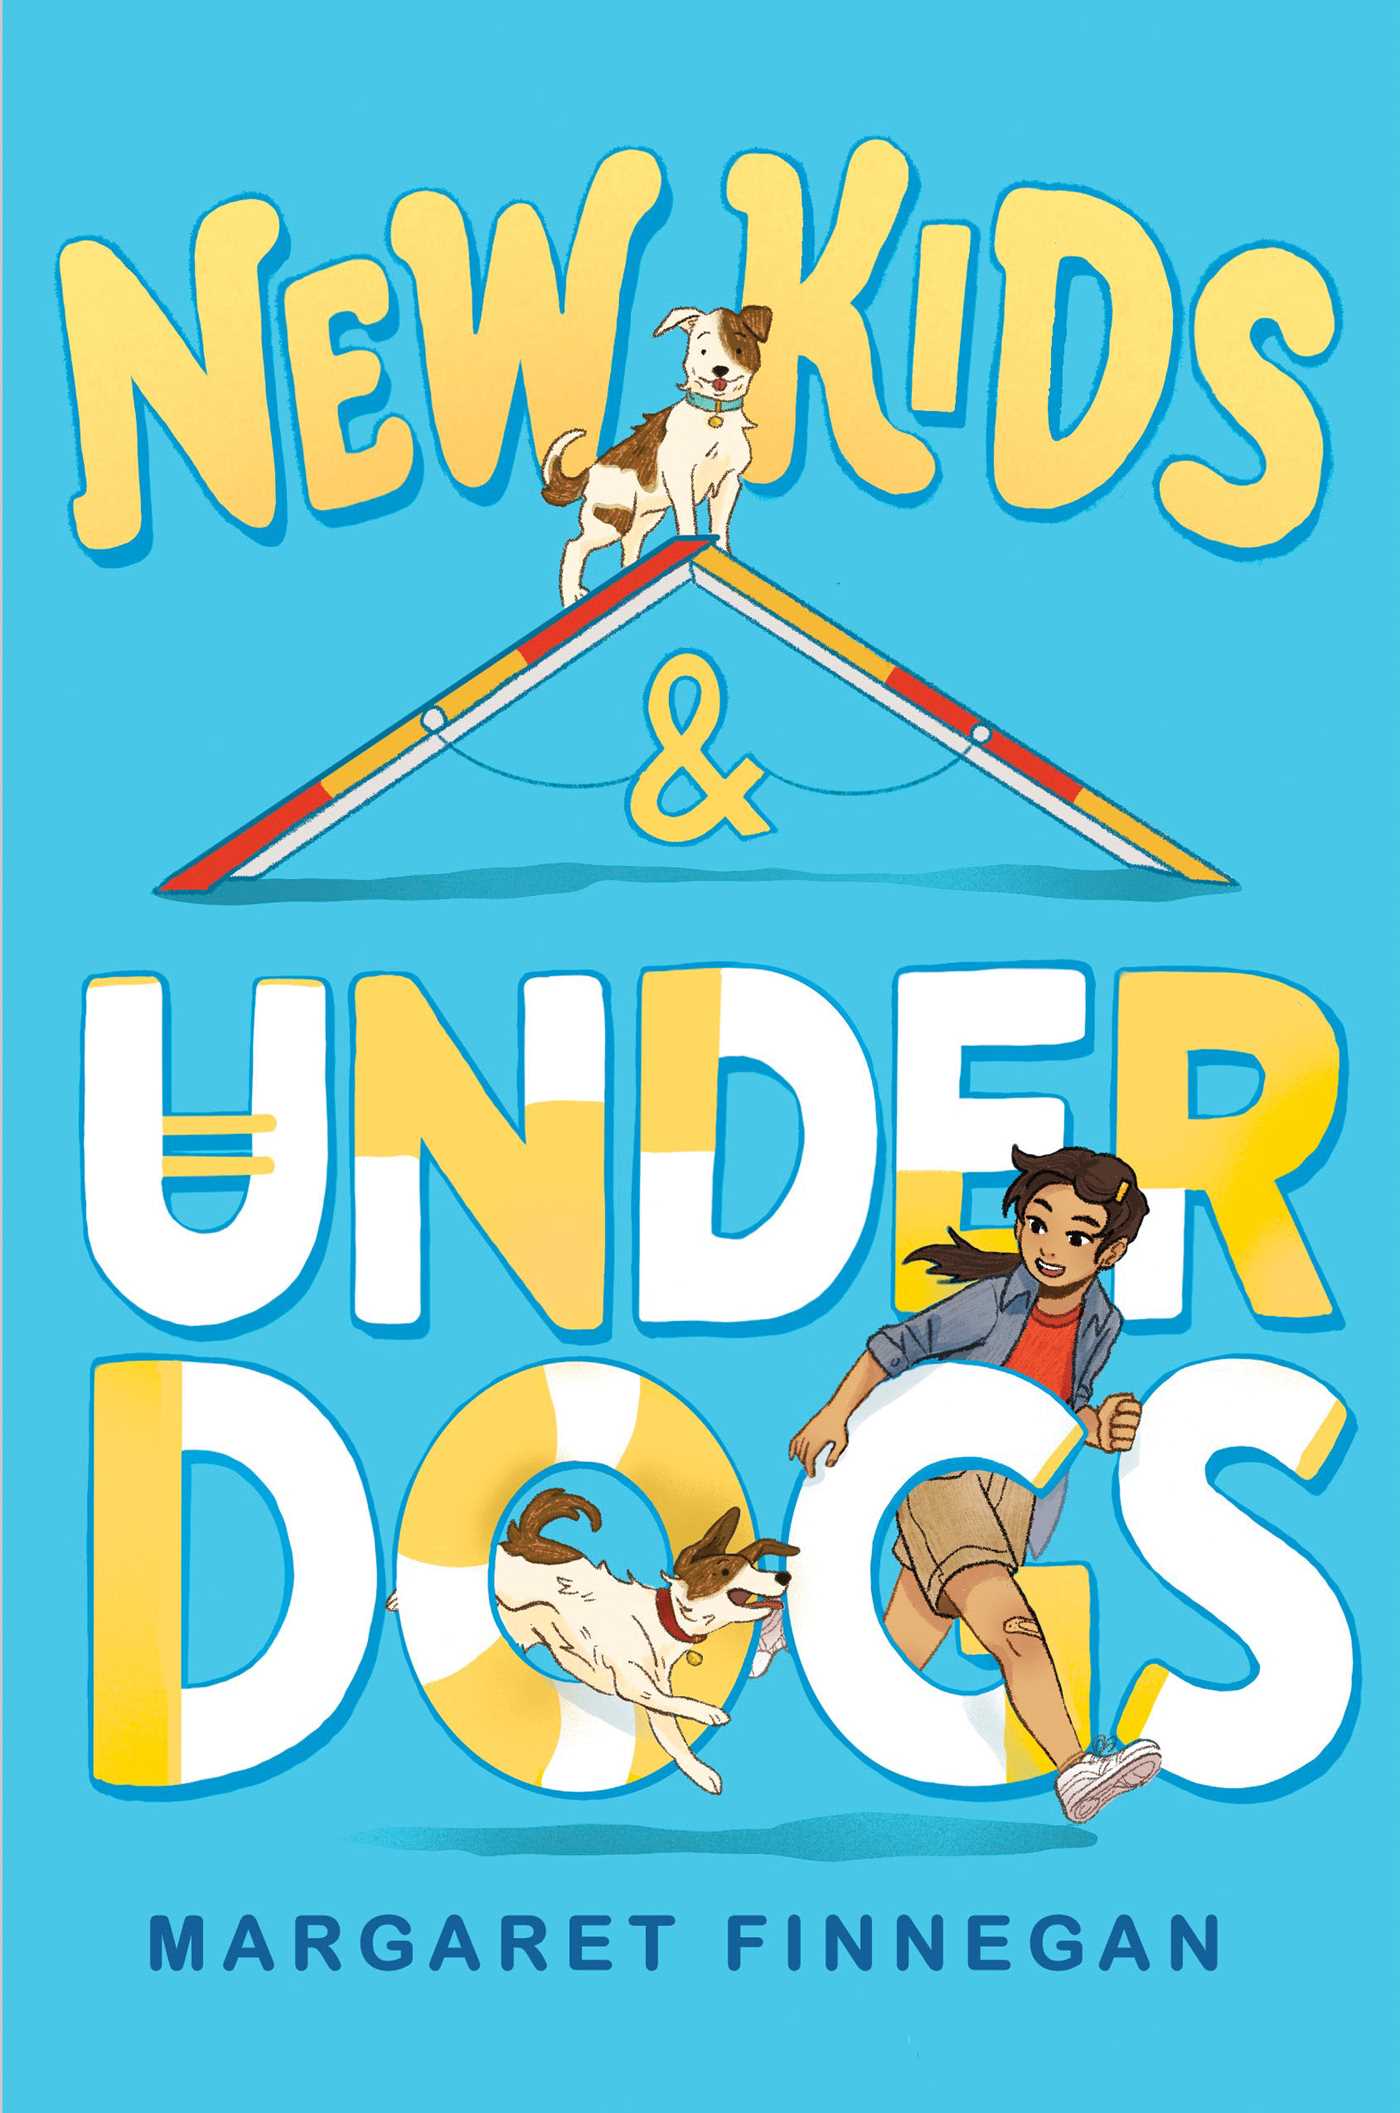 Image for "New Kids and Underdogs"